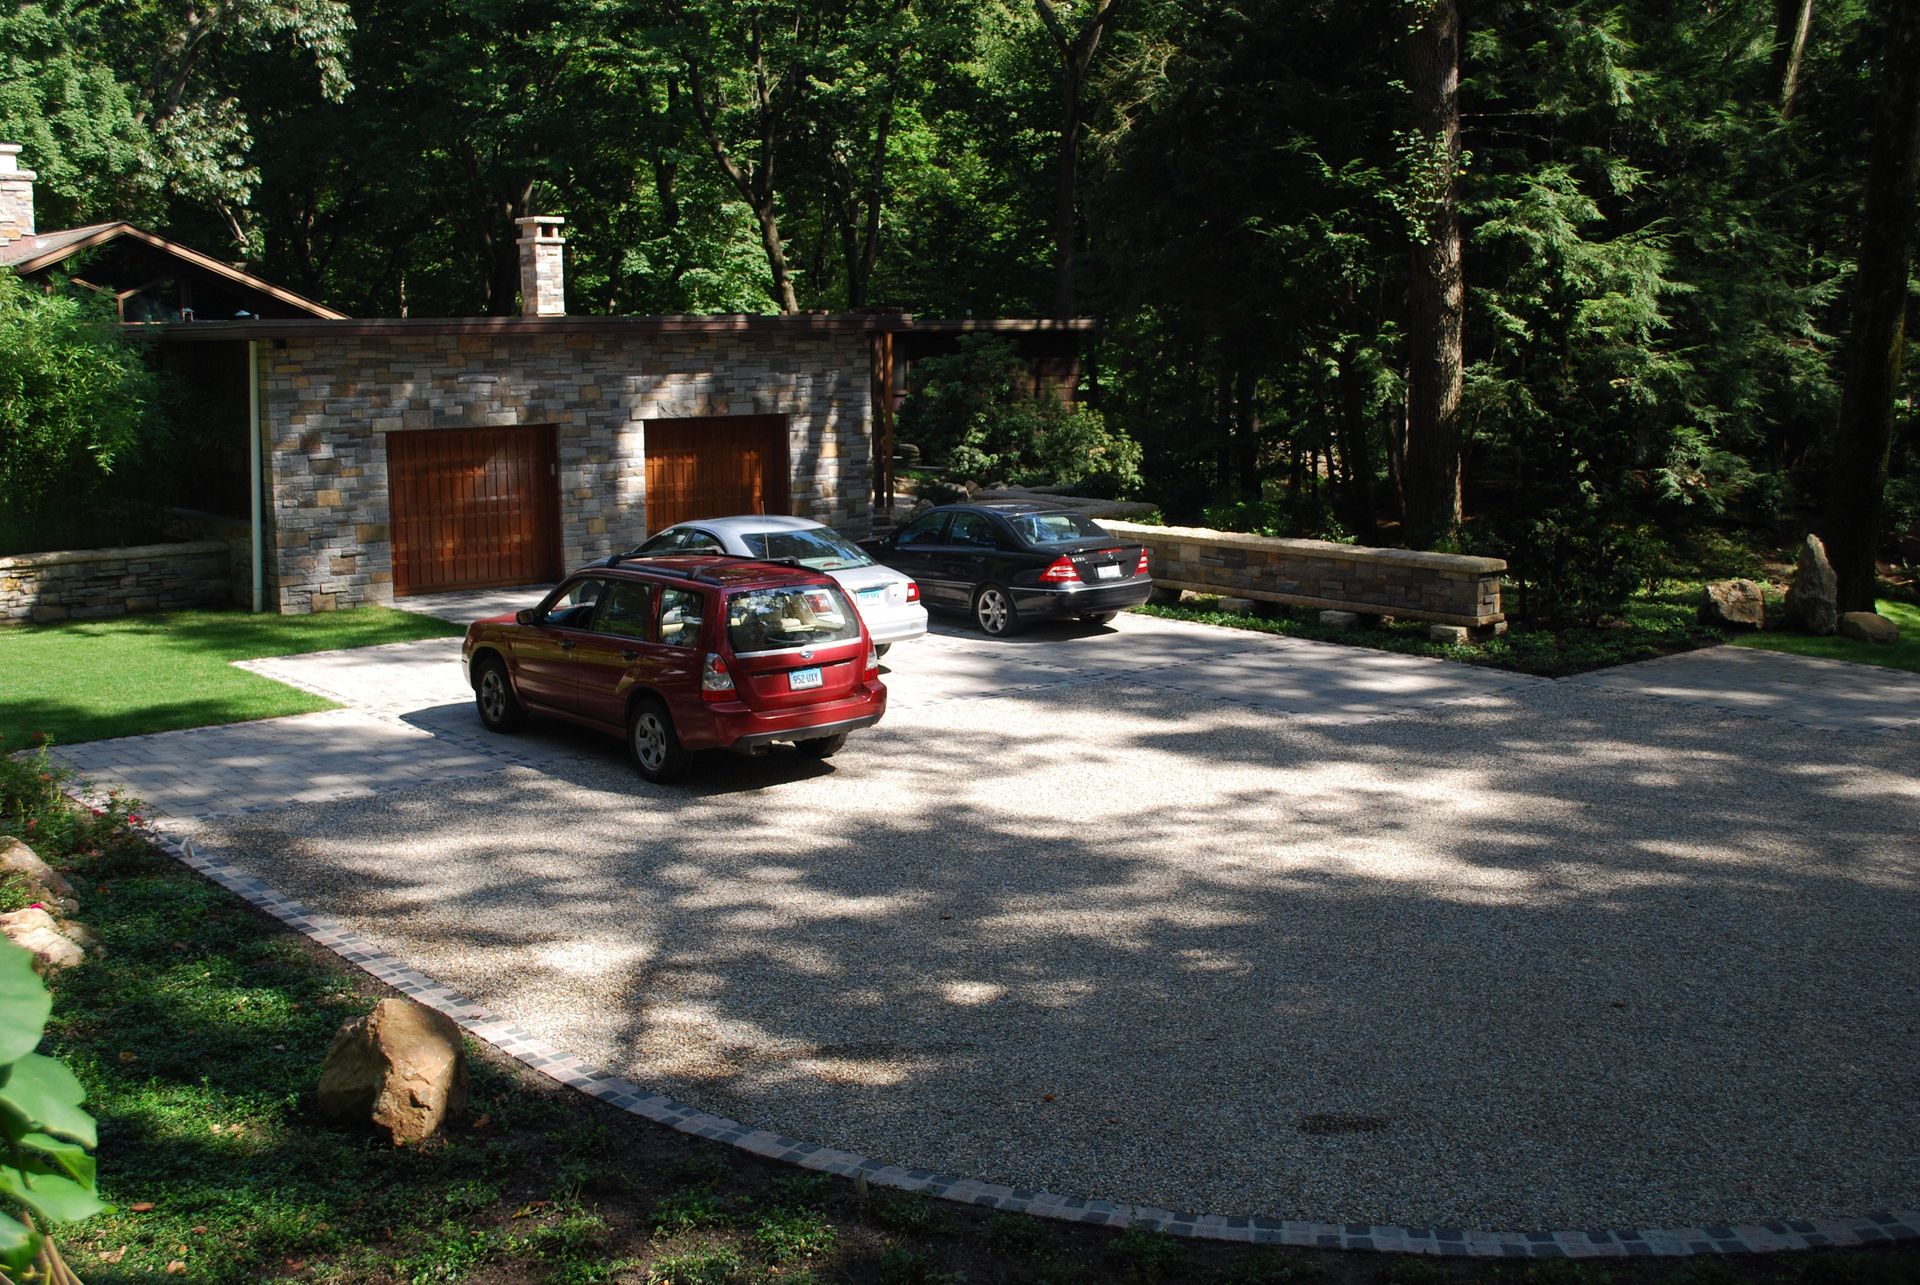 A red car is parked in a gravel driveway in front of a house